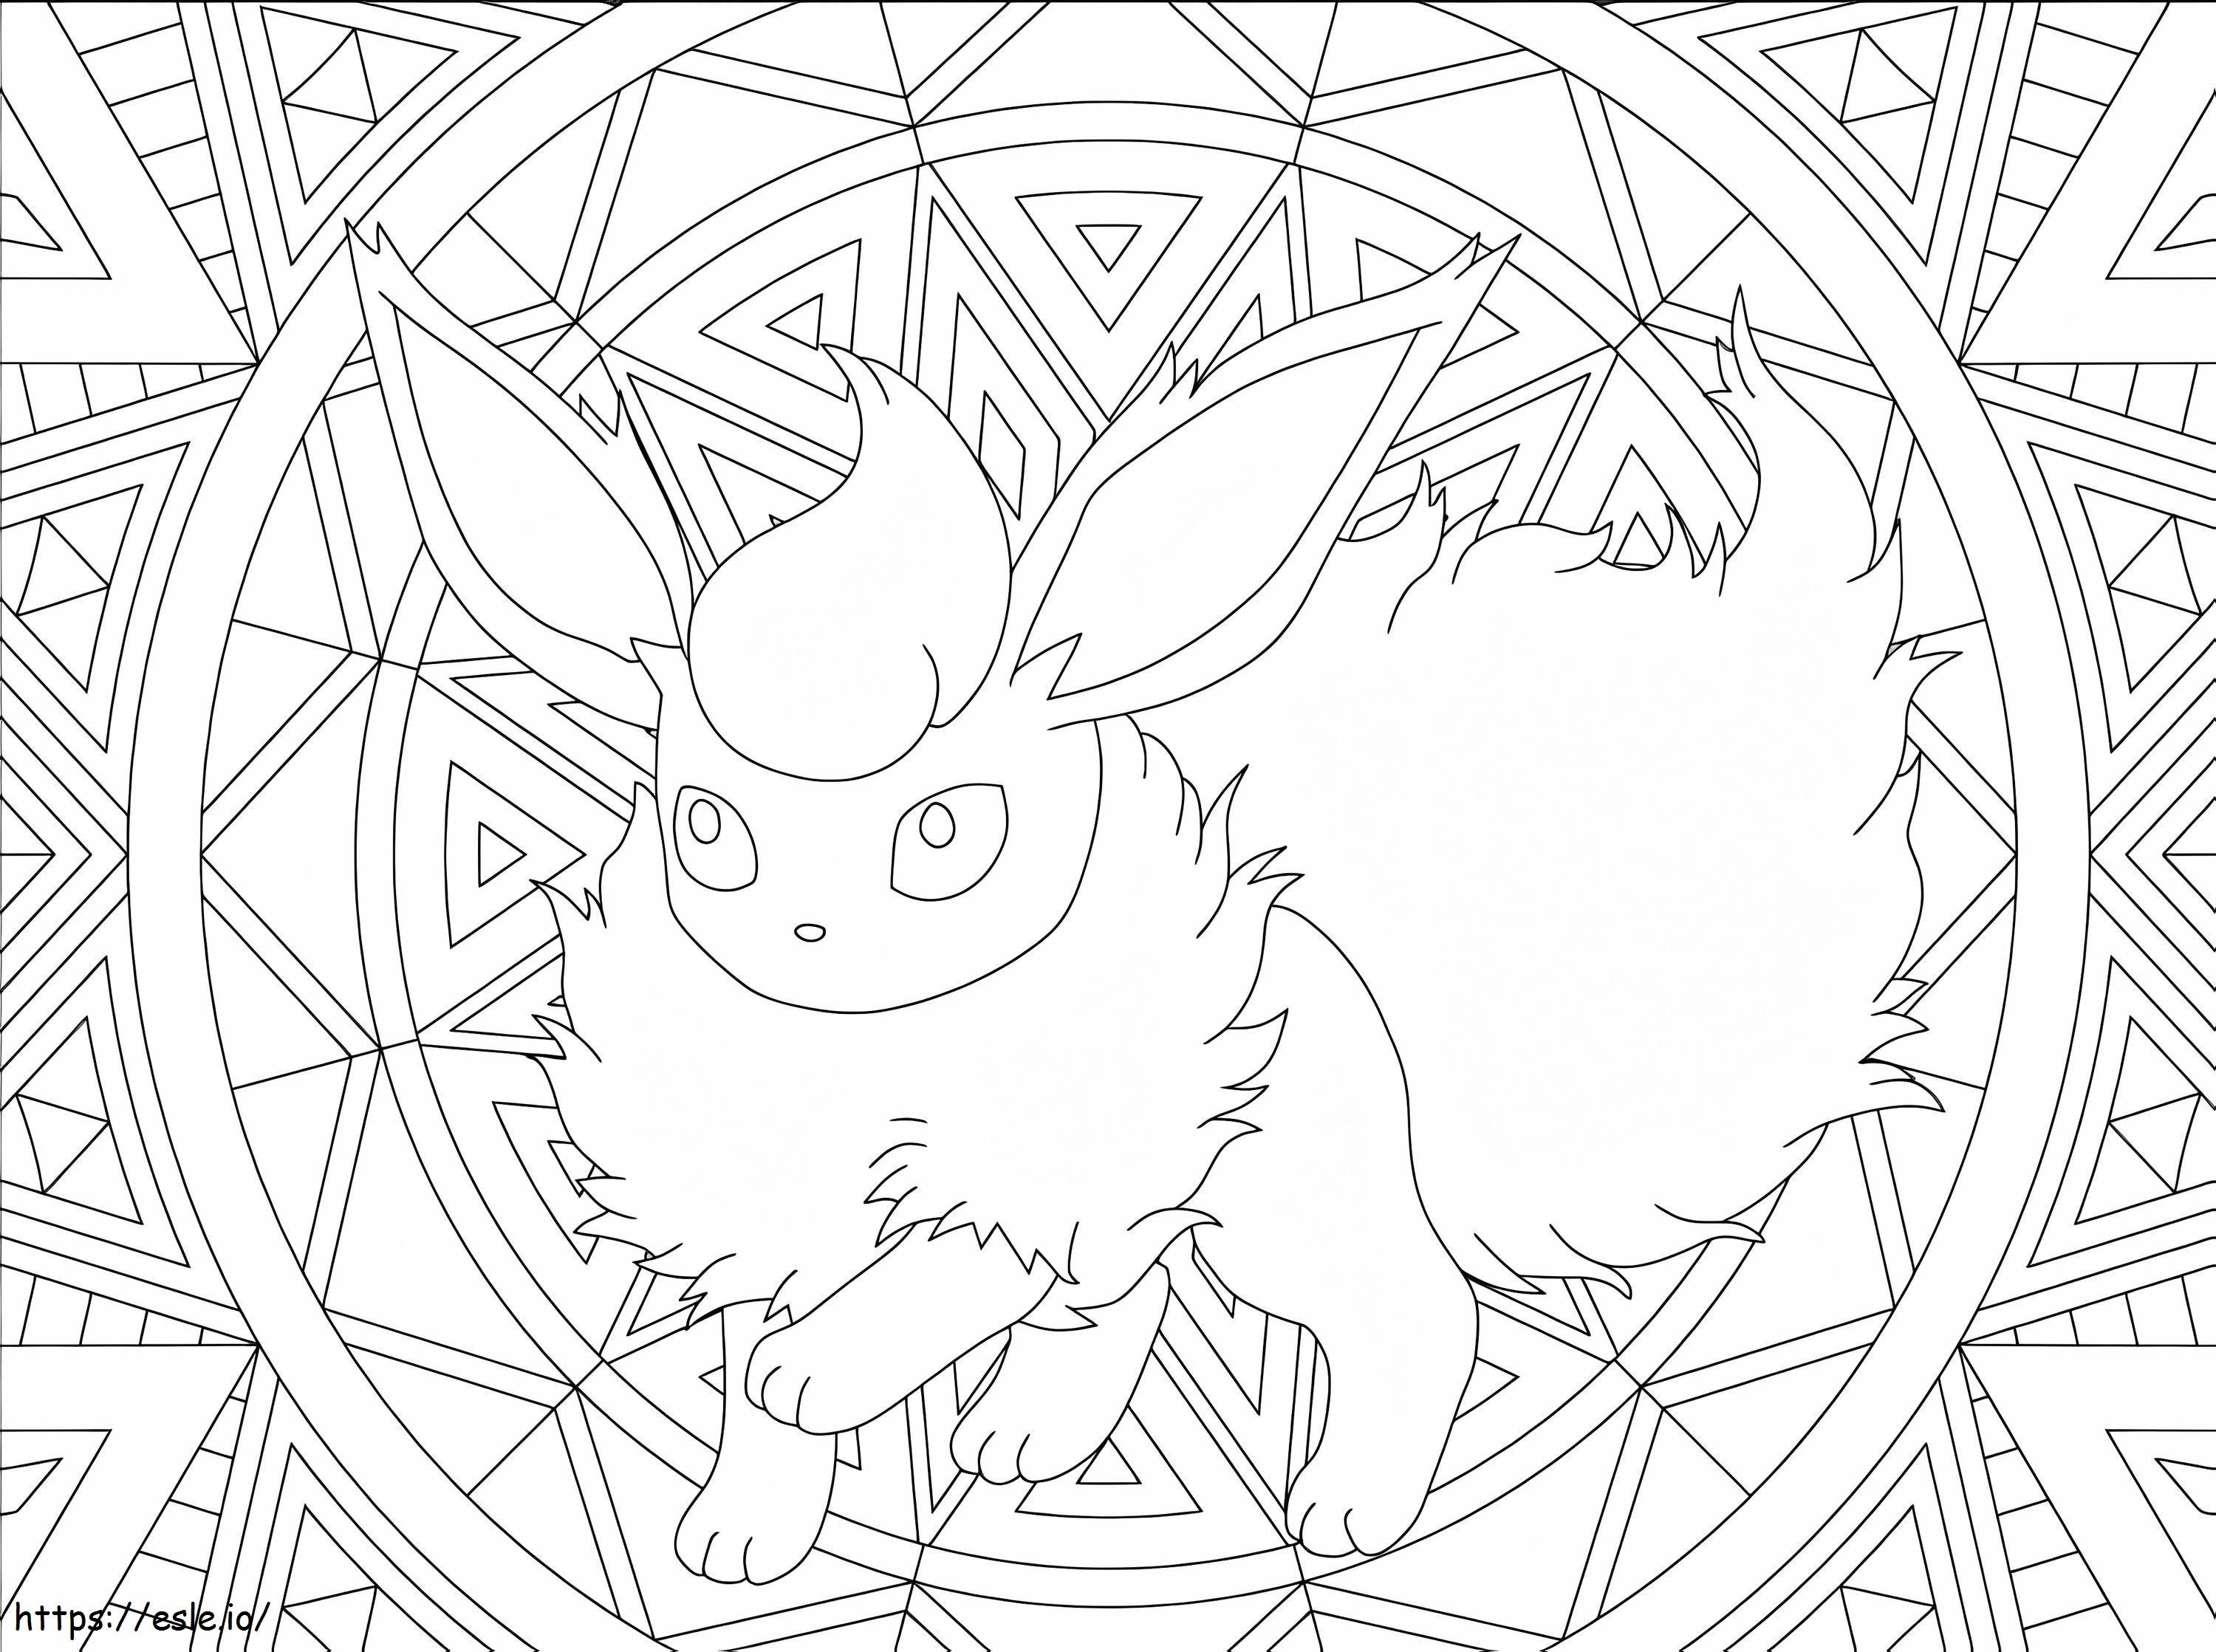 Flareon 5 coloring page